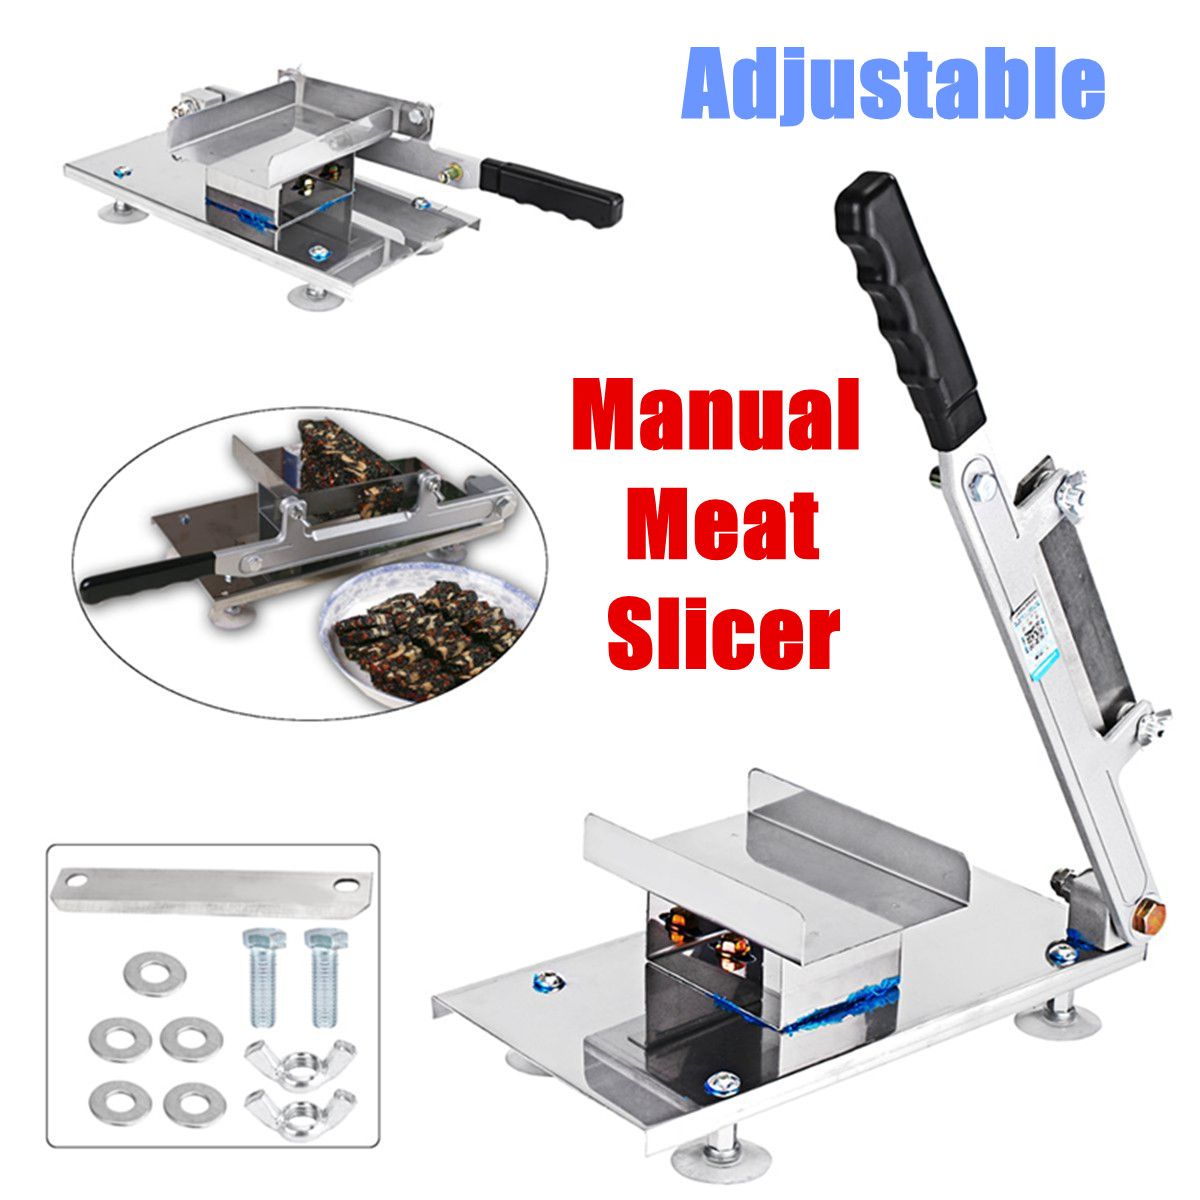 Adjustable-Manual-Frozen-Food-Meat-Slicer-Cutter-Beef-Mutton-Food-Handle-Cutting-Machine-1365937